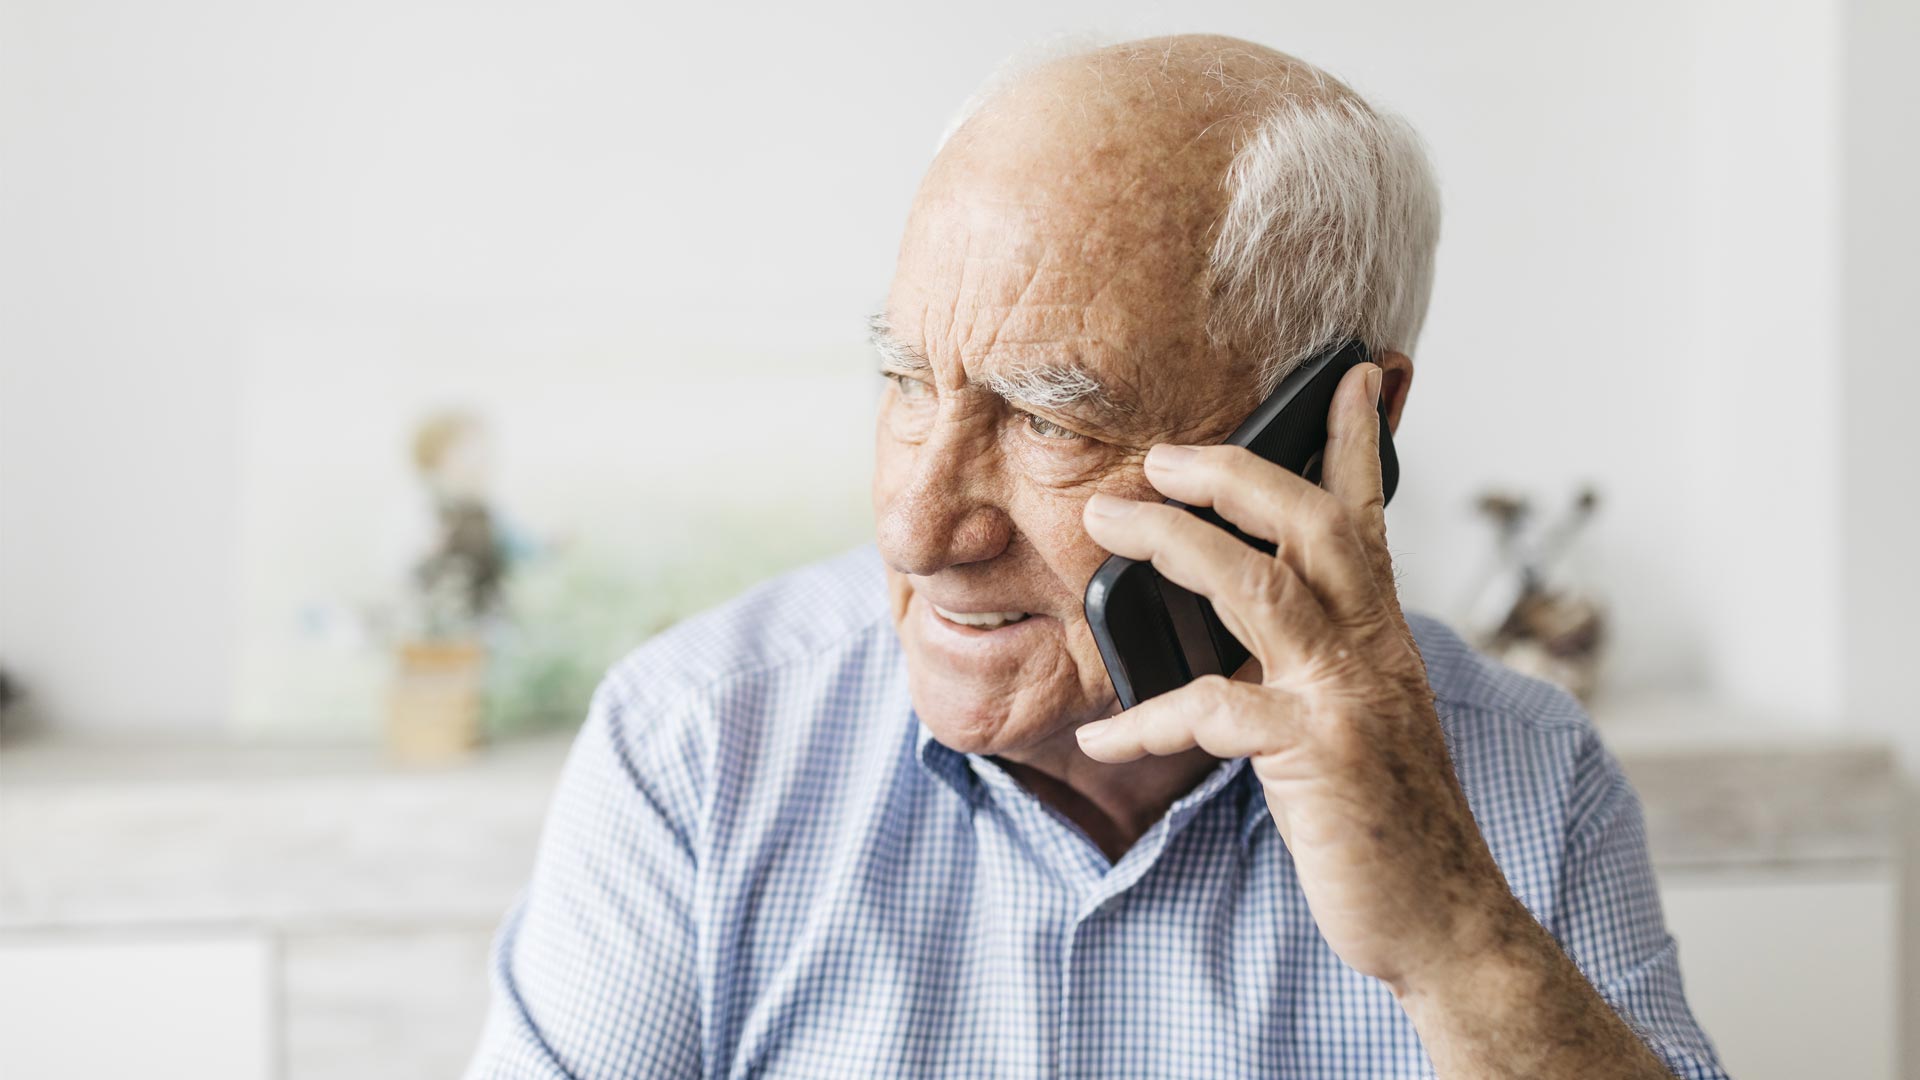 Screening for Dementia by Telephone